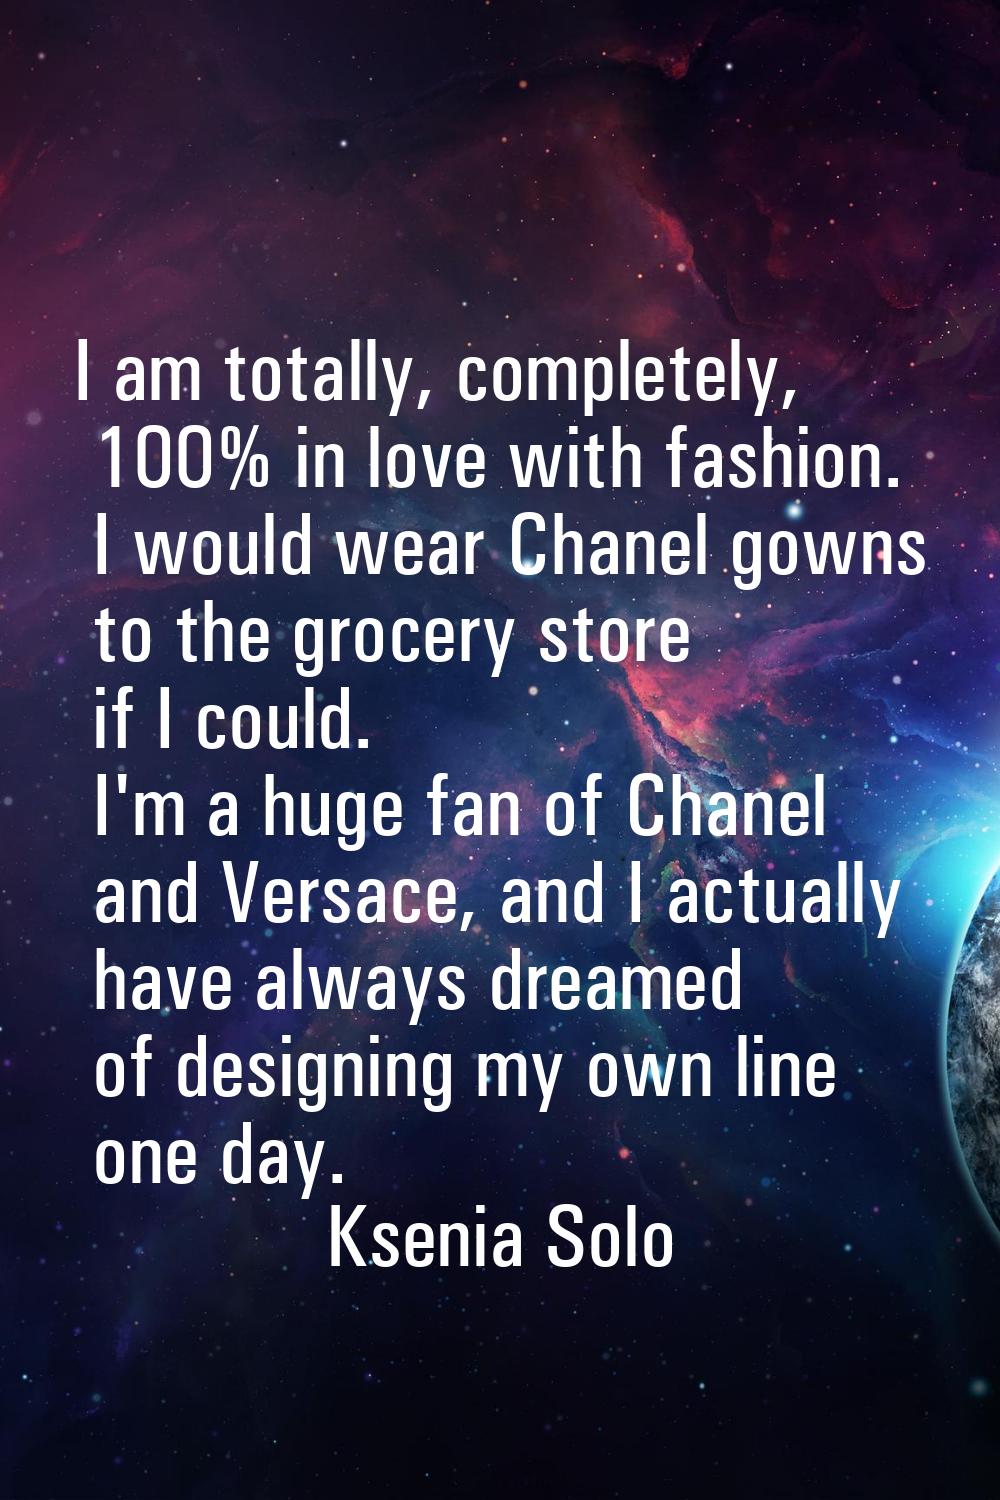 I am totally, completely, 100% in love with fashion. I would wear Chanel gowns to the grocery store